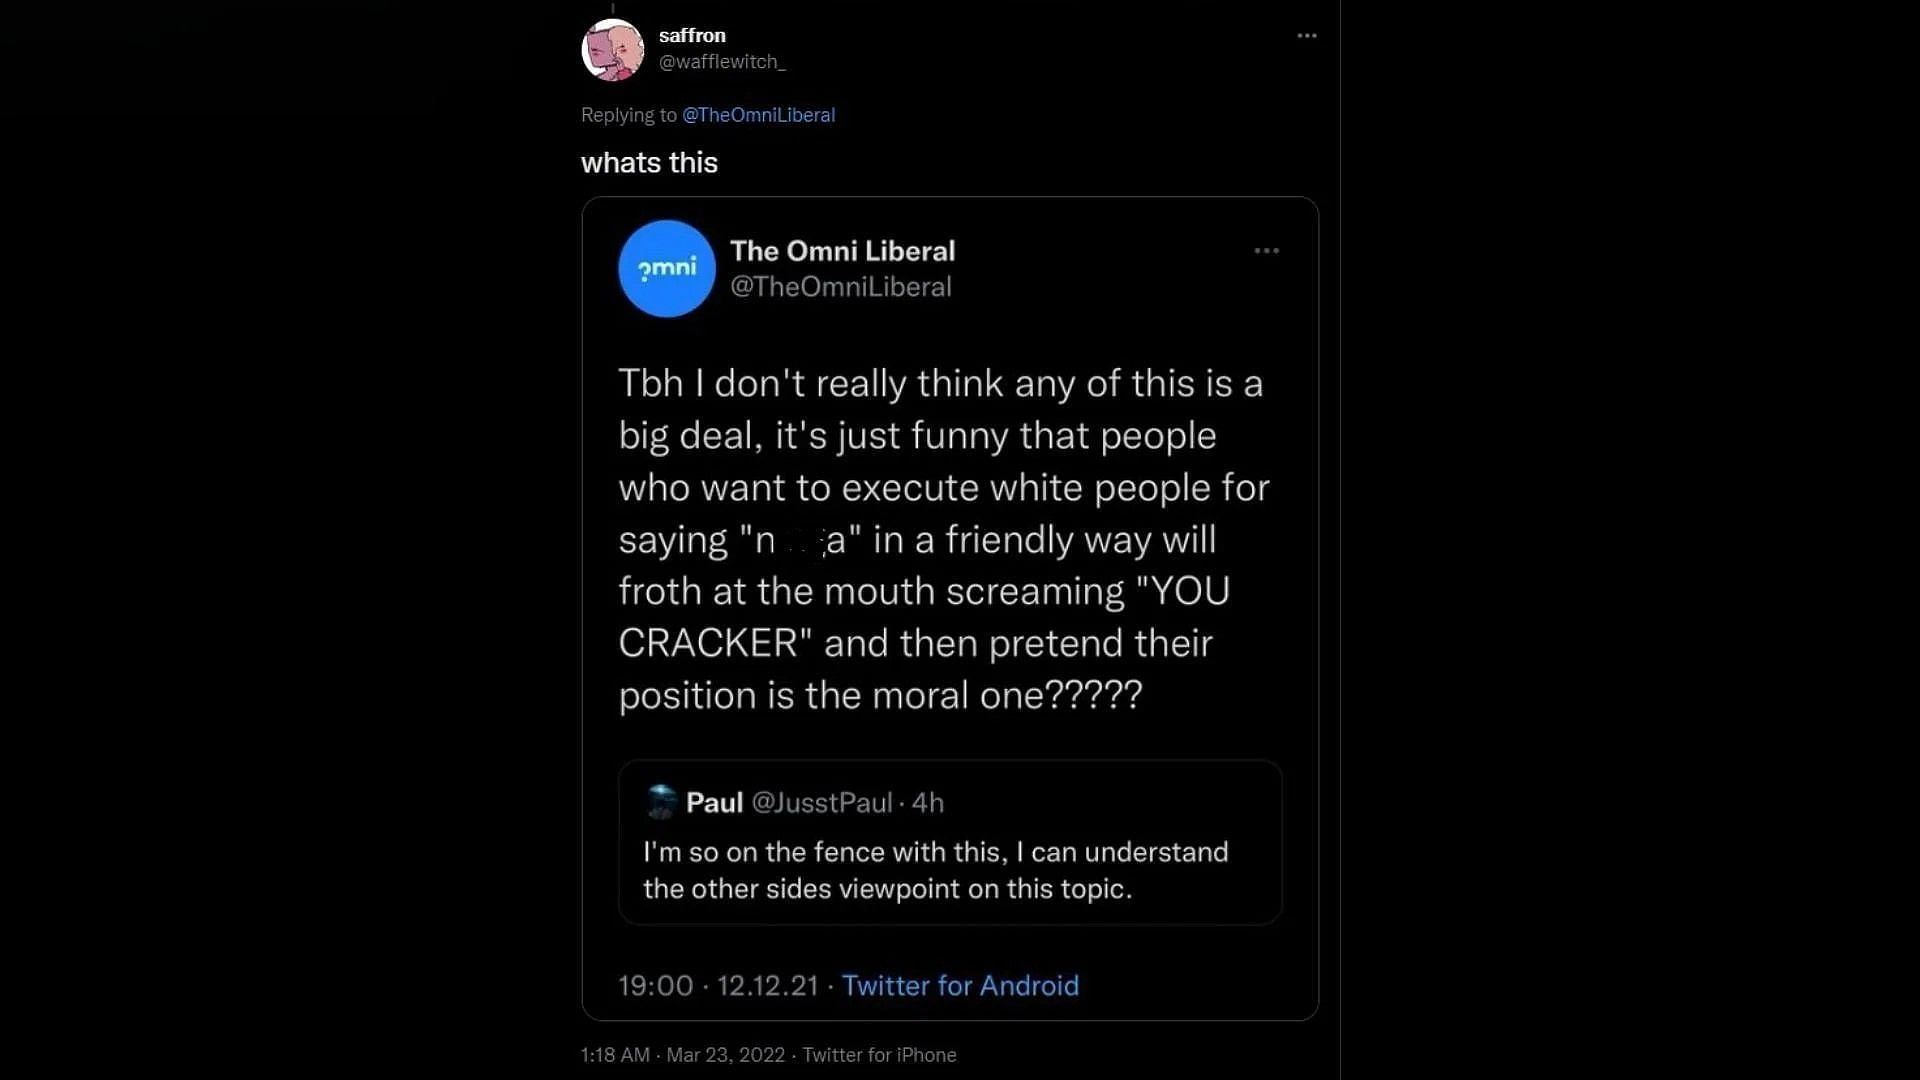 Screenshot of an original tweet made by The Omni Liberal Twitter account (Image via Twitter wafflewitch)